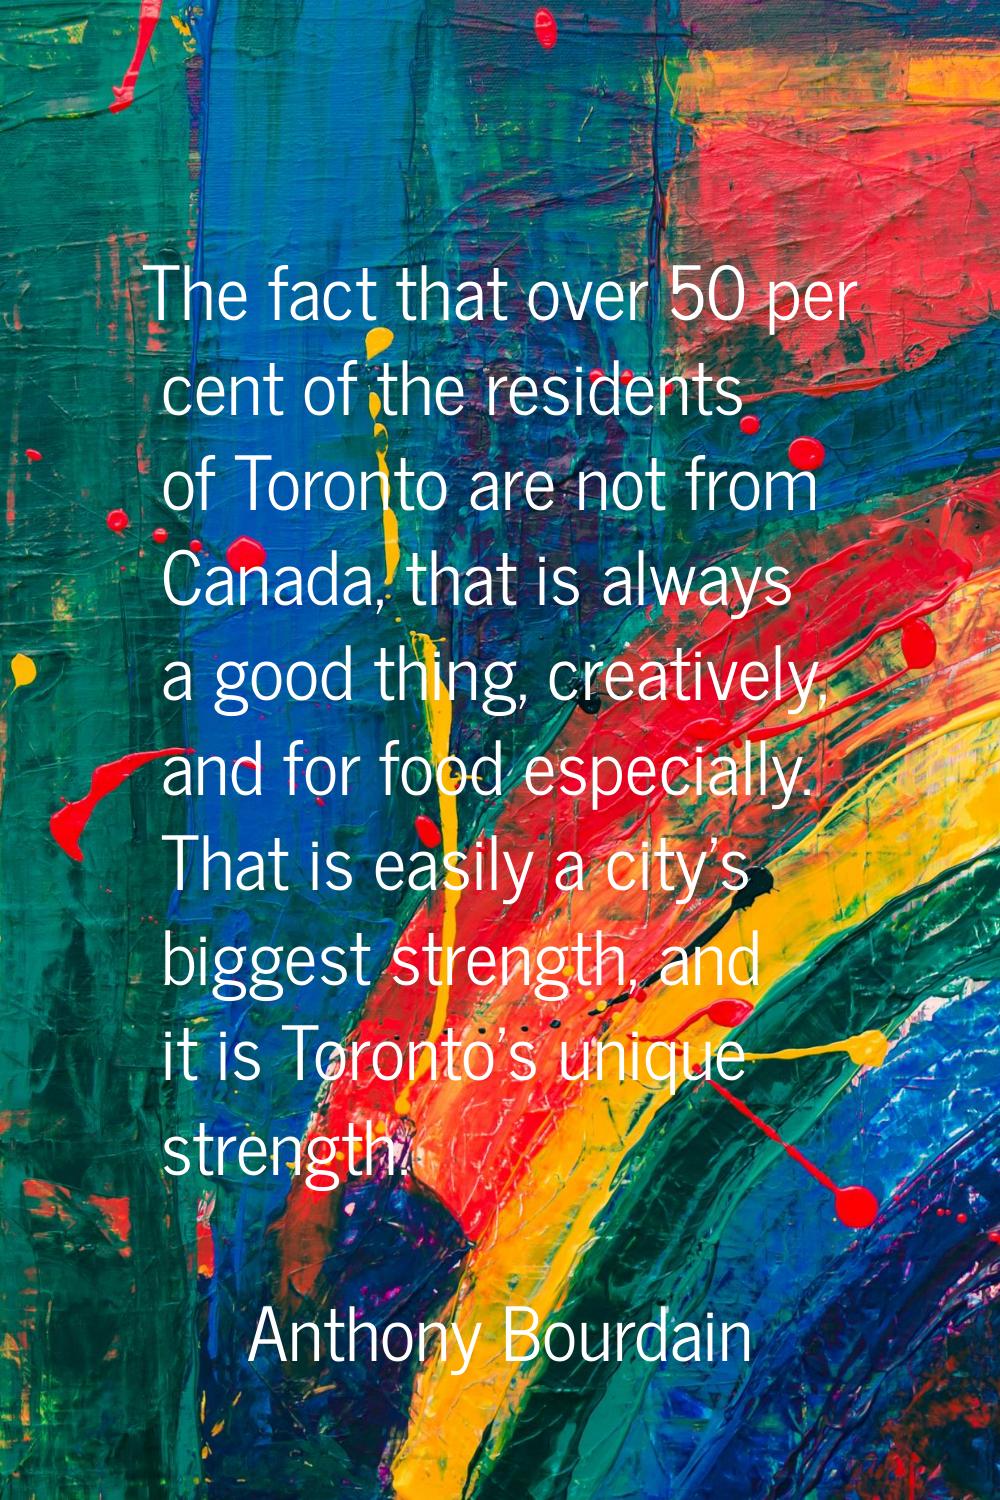 The fact that over 50 per cent of the residents of Toronto are not from Canada, that is always a go